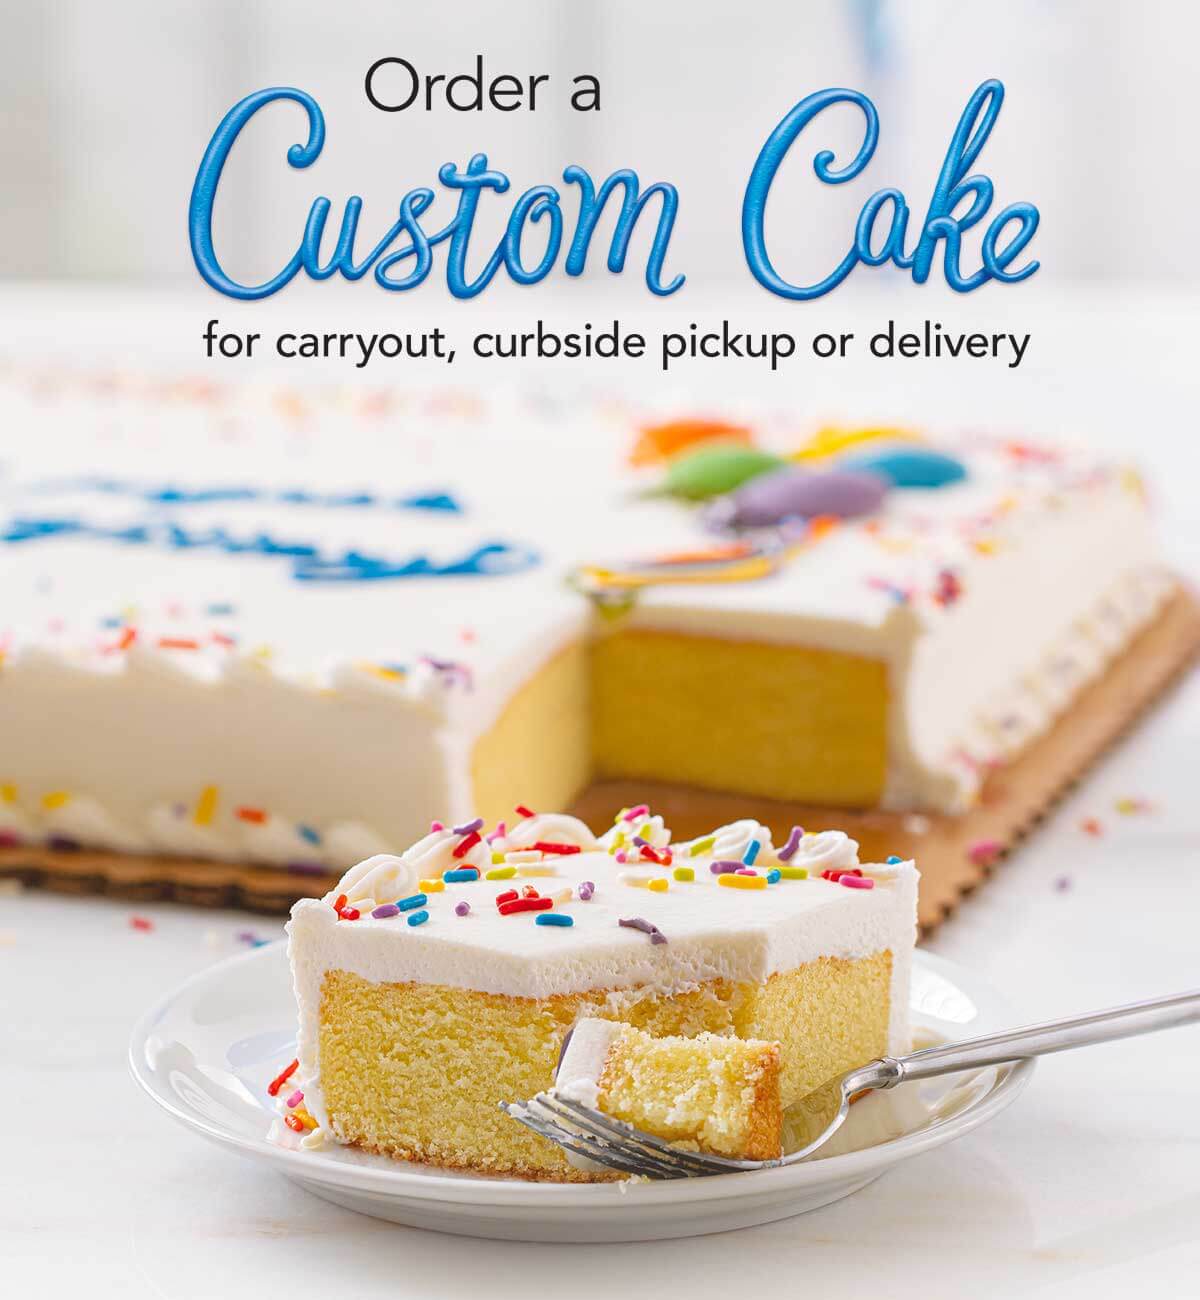 Custom Cakes Available to Order Online - Birthday, Cookie, and Sheets! - Wegmans